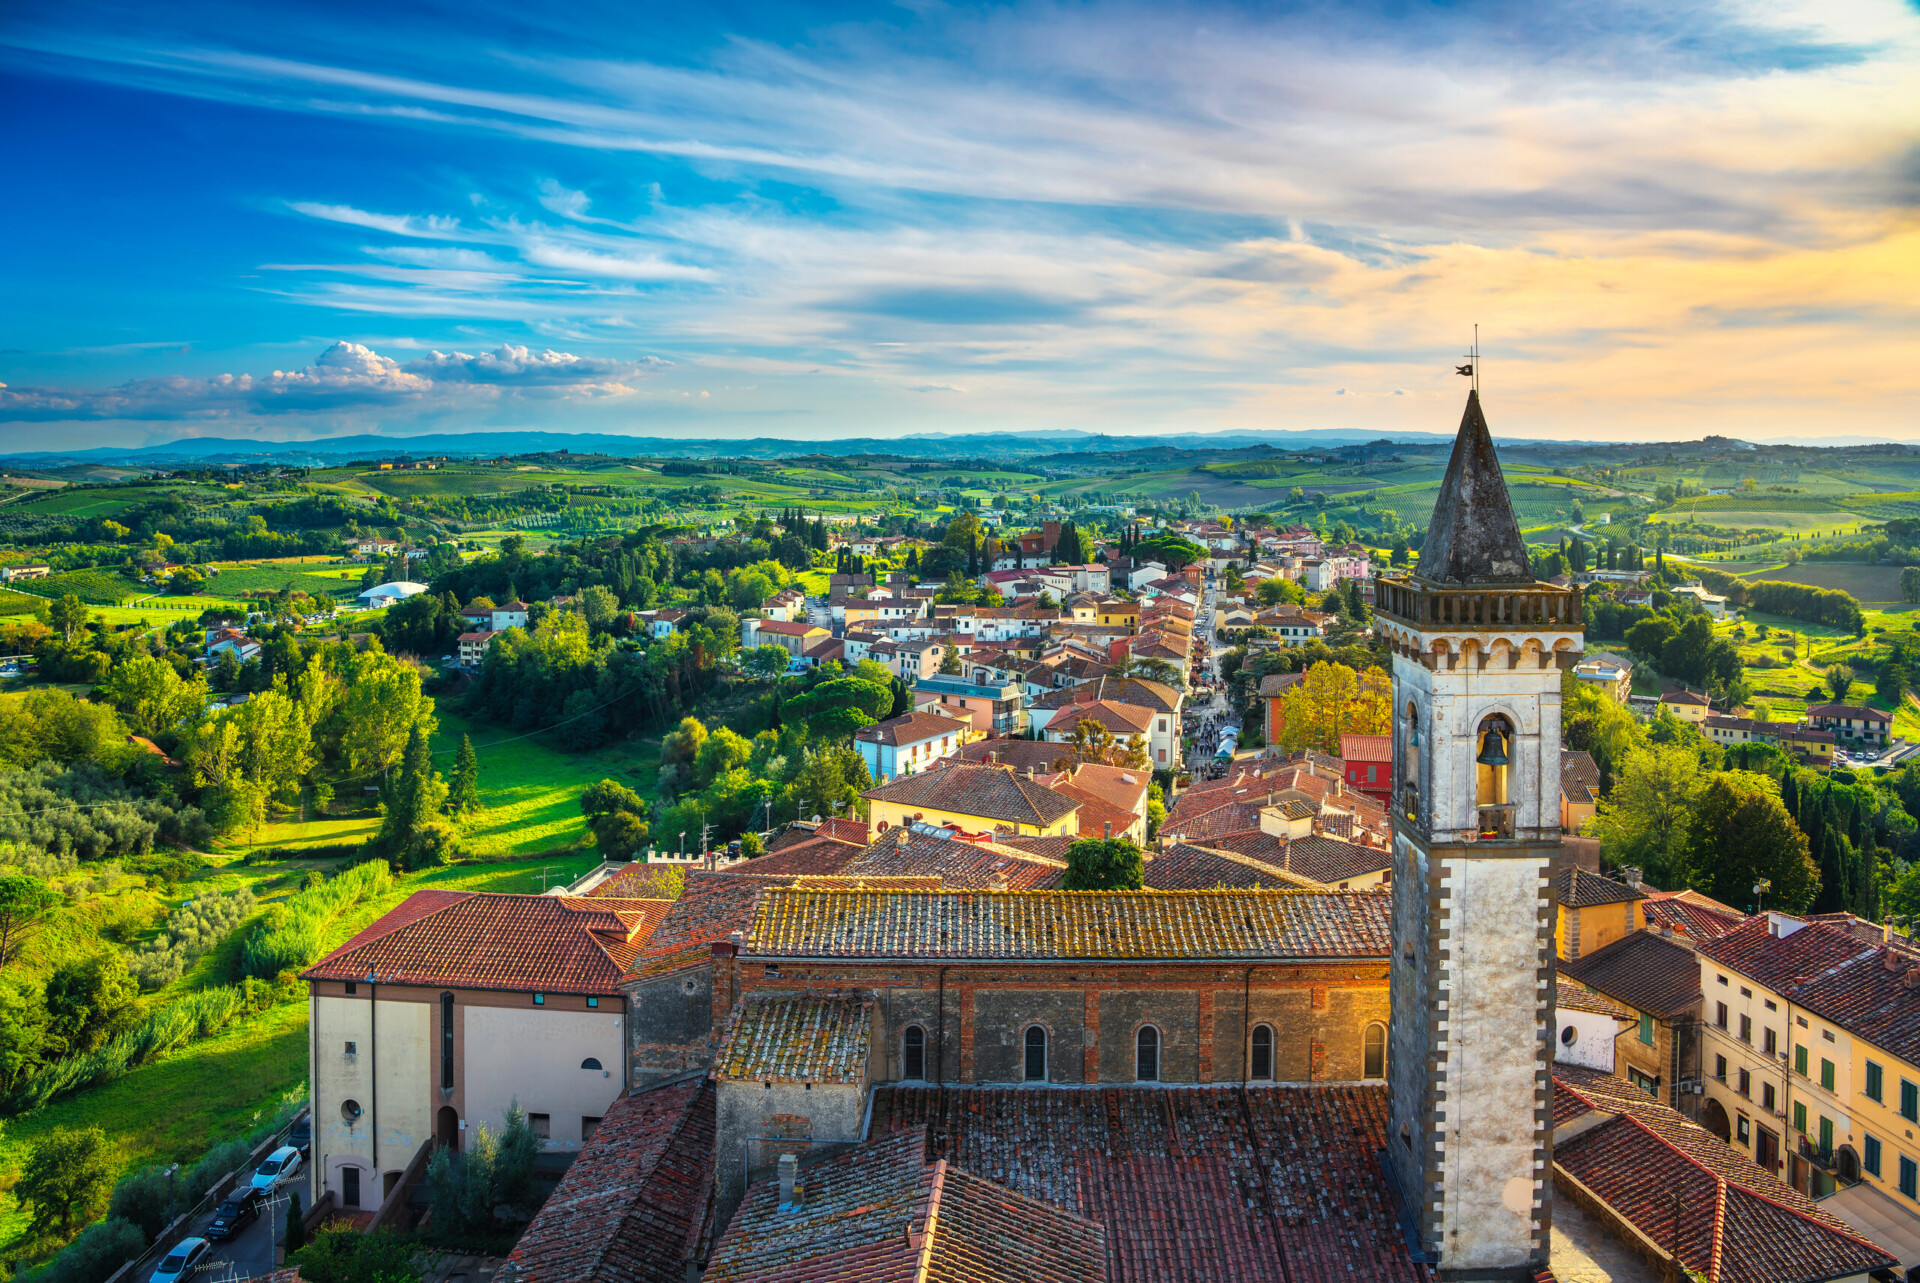 Vinci village, Leonardo birthplace, aerial view and bell tower of the church. Florence, Tuscany Italy Europe